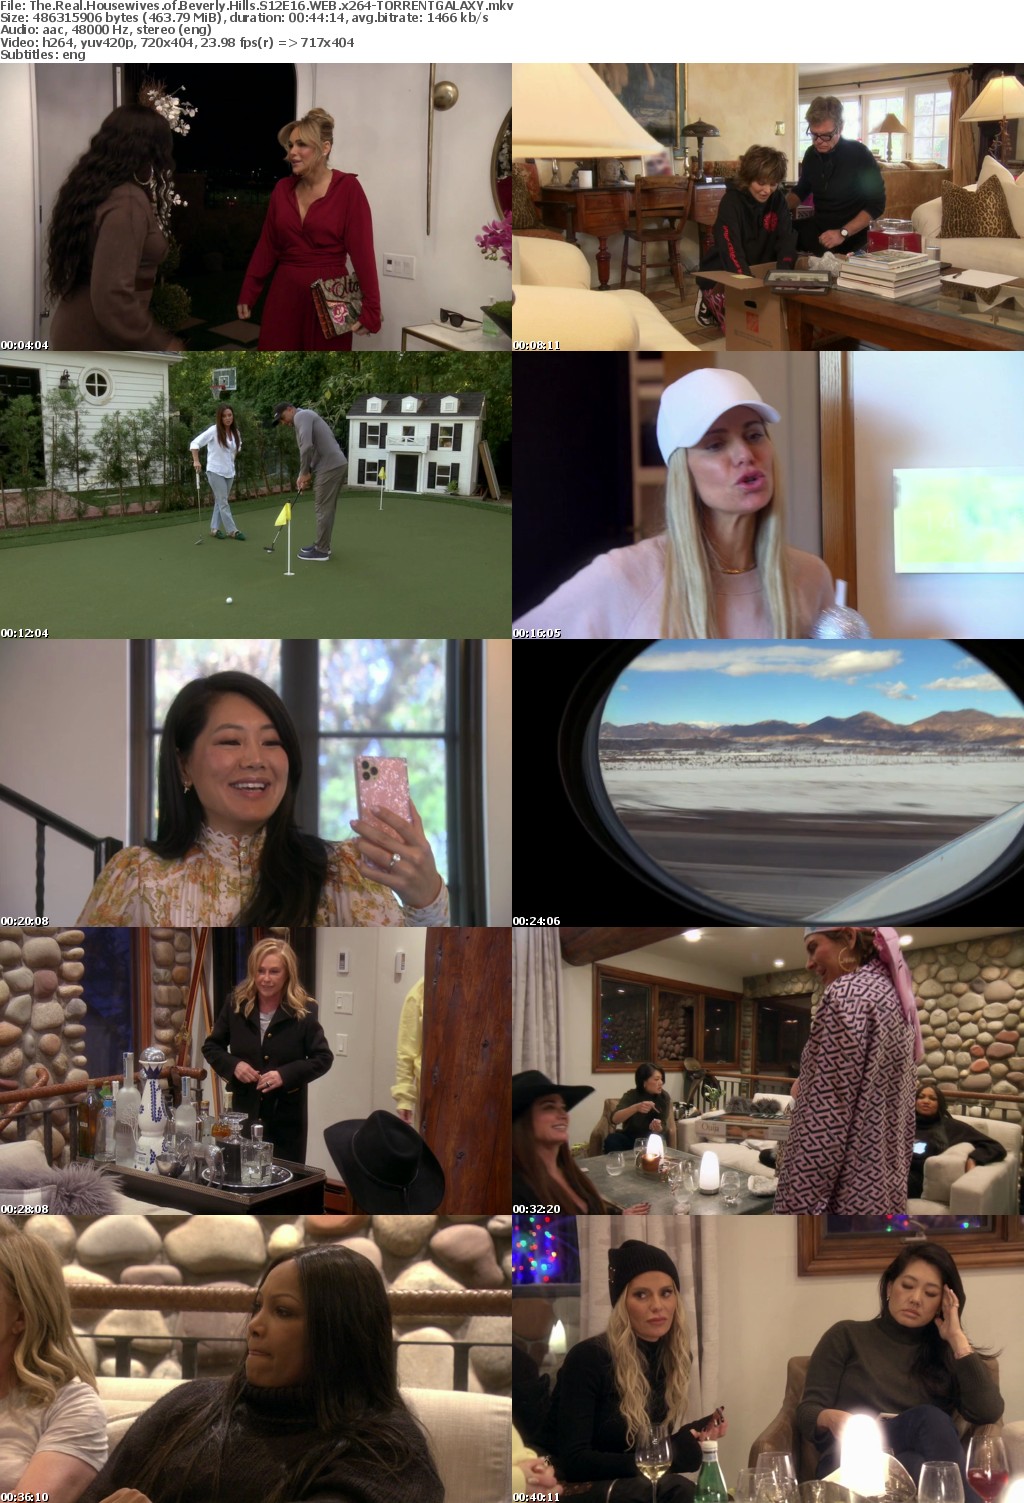 The Real Housewives of Beverly Hills S12E16 WEB x264-GALAXY